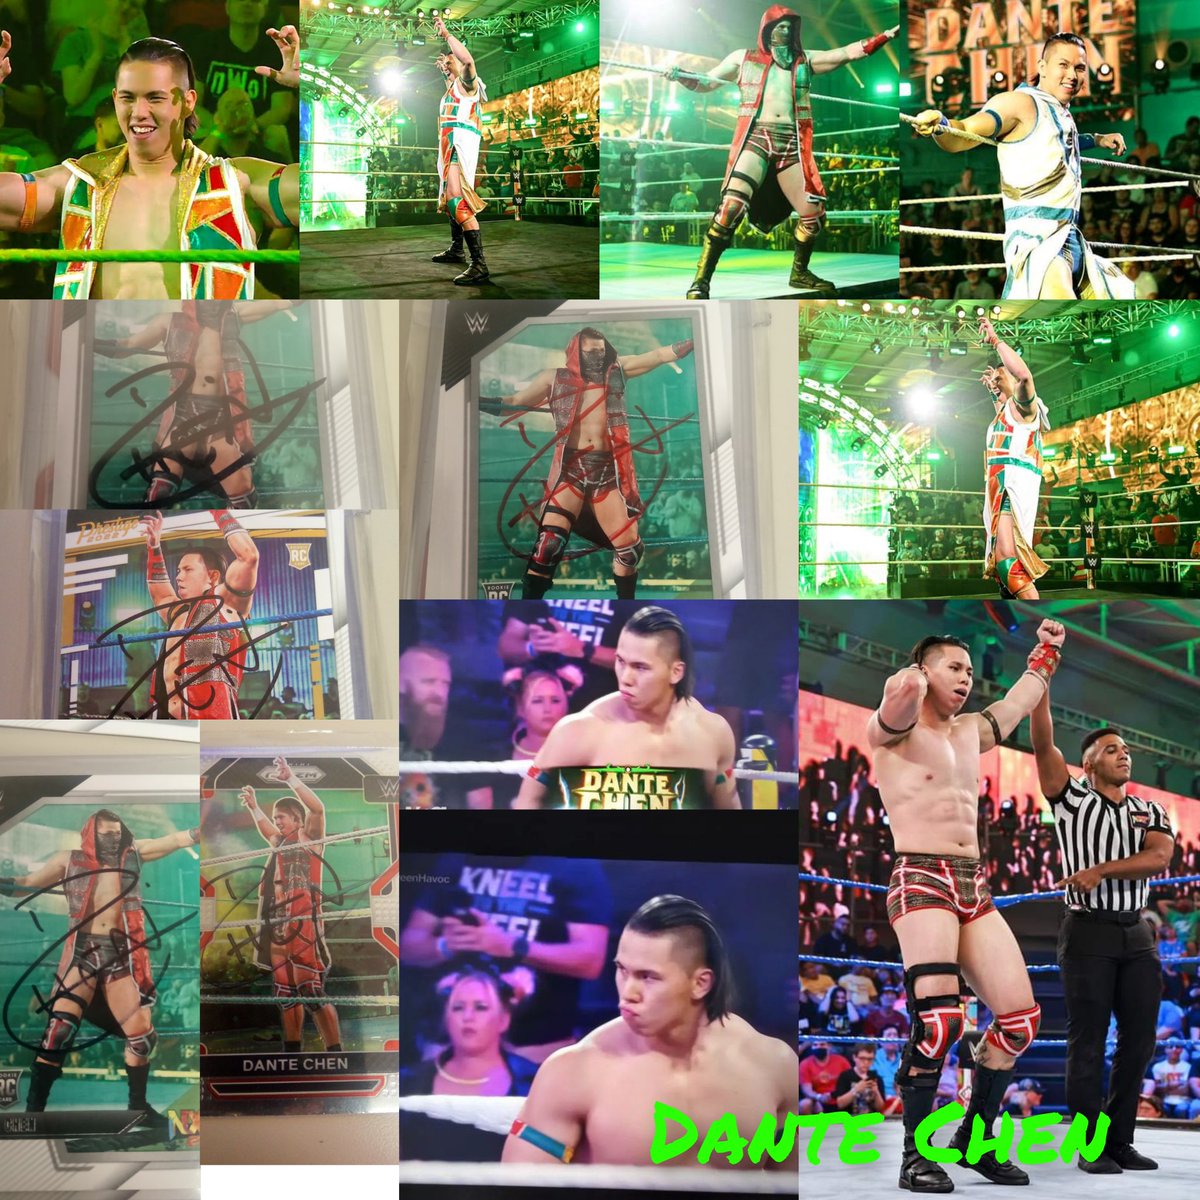 I feel a lot happy to finish this new photo collage edit for my WWE Superstar that I really love and support the most, I am so lucky that I'm still such a huge number one fan of @DanteChenWWE 😍😍😍🥰🥰🥰❤️❤️❤️, hopefully one day I really want to meet him